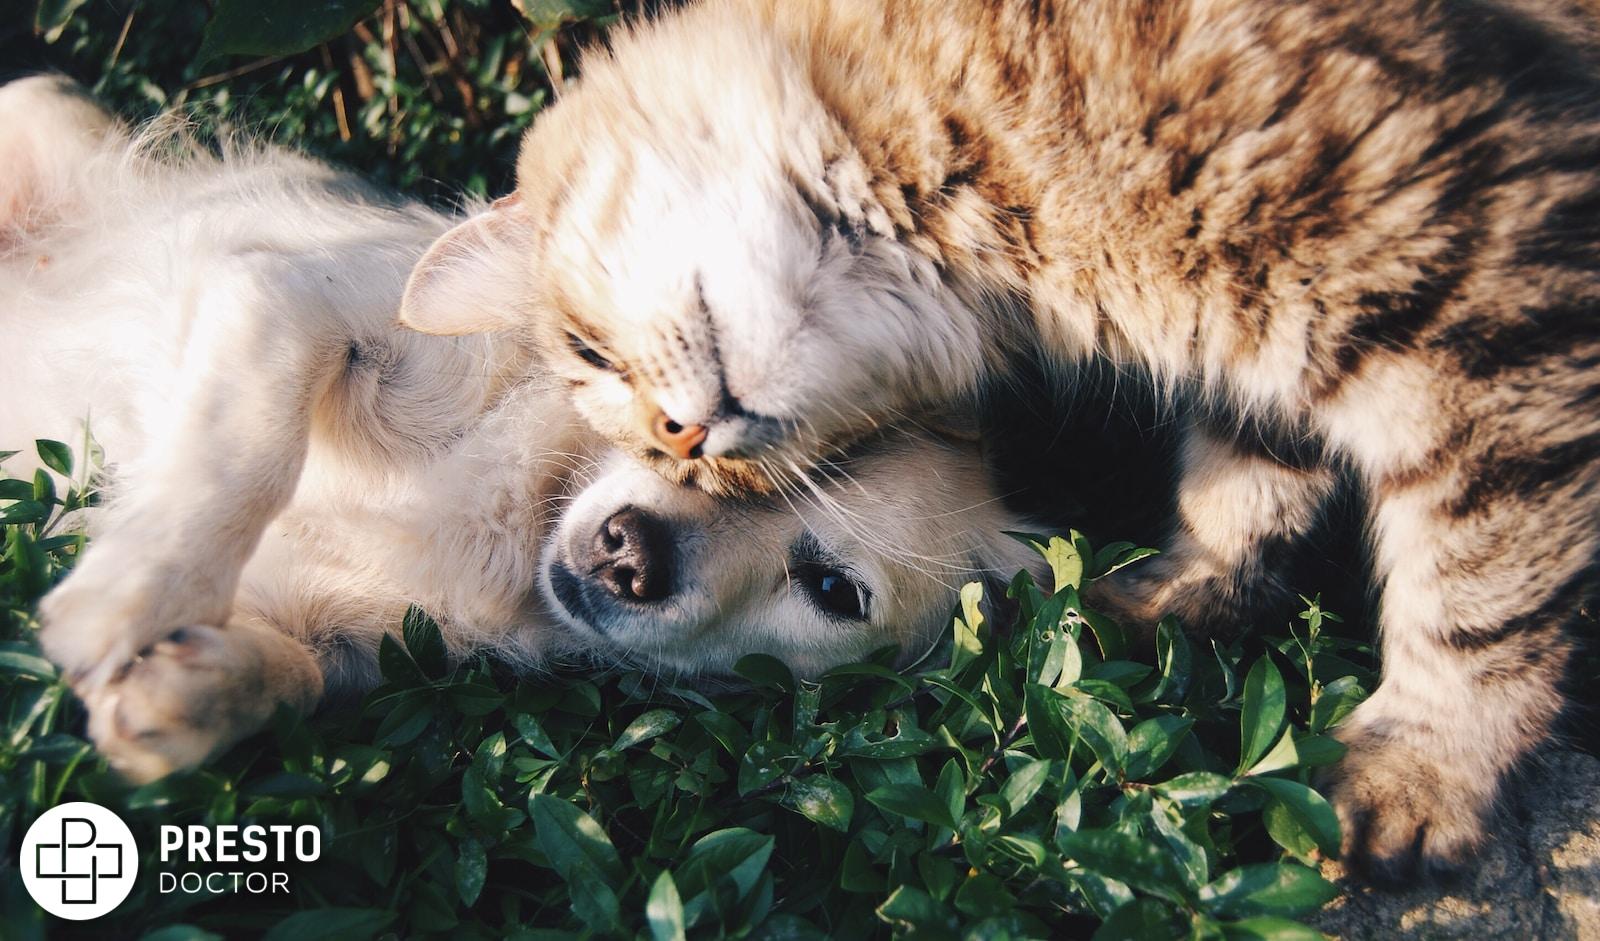 white dog and gray cat hugging each other on grass, cbd pets